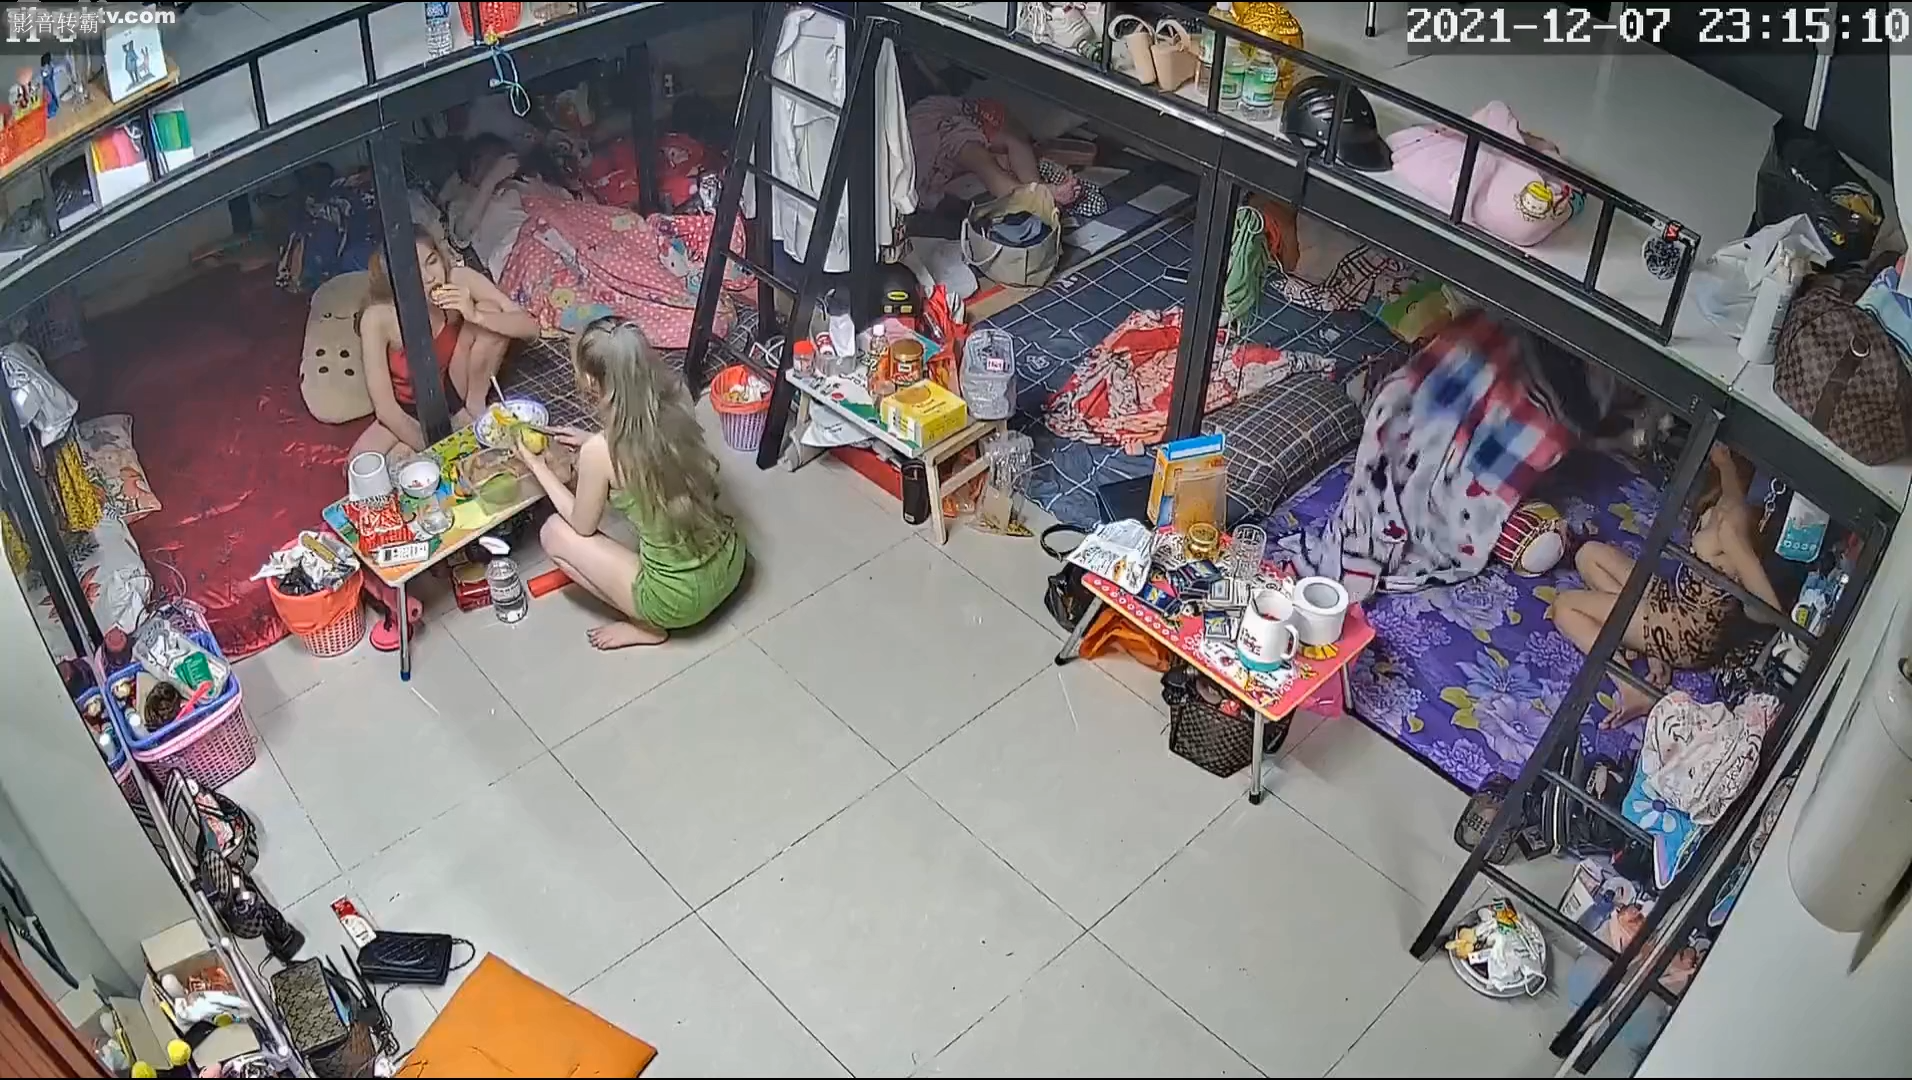 Hack cam of the girls' dormitory room part 1